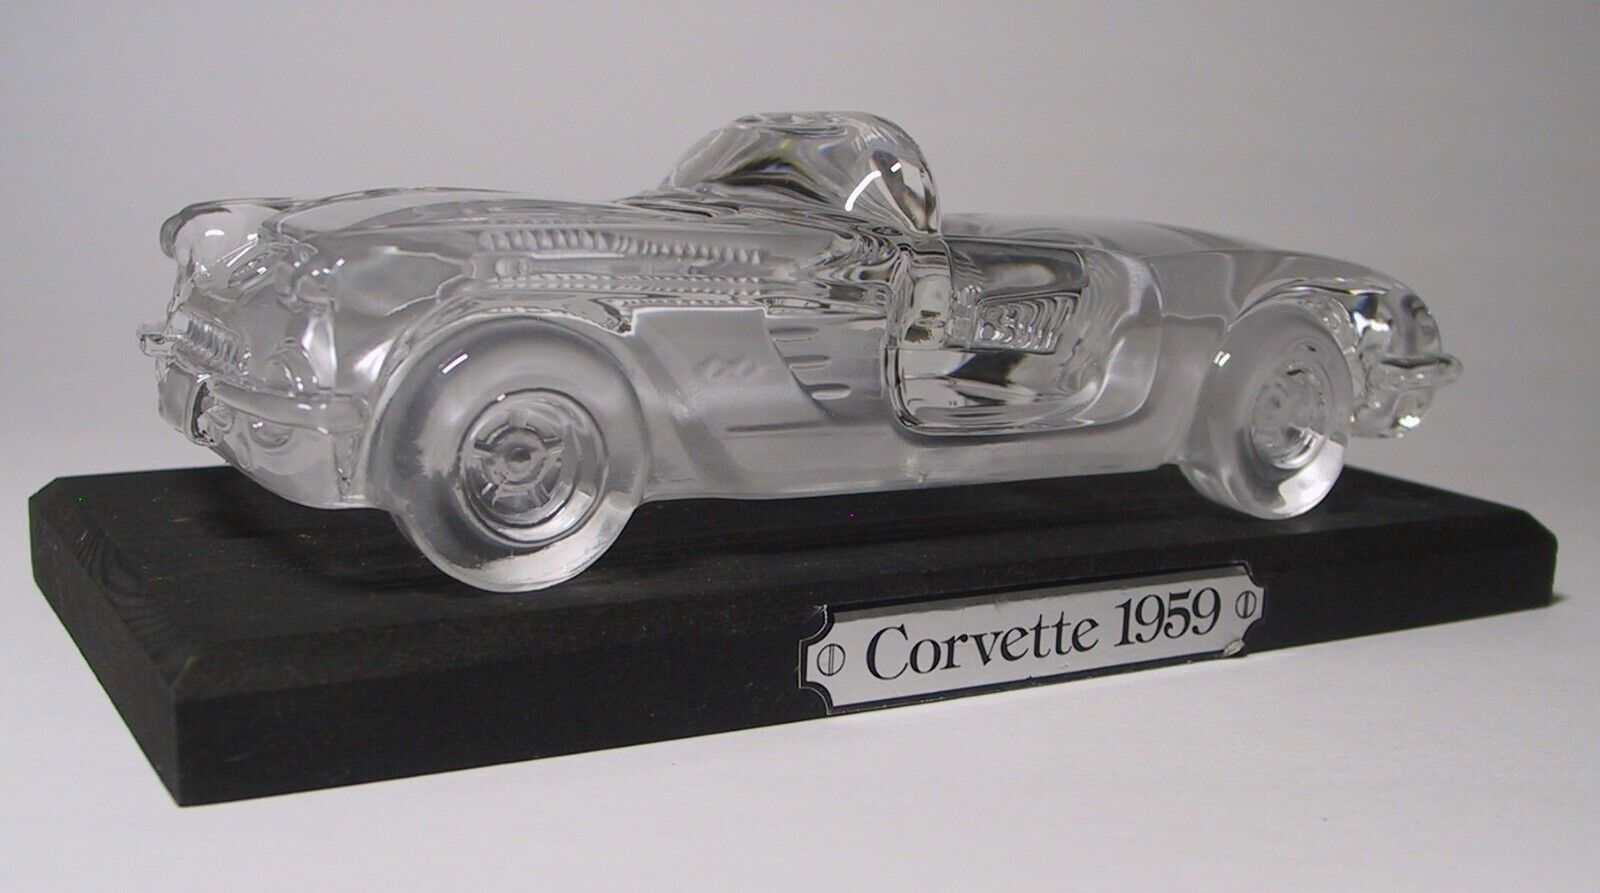 Vintage Glass Crystal Model of the 1959 Corvette made by Hofbauer of Germany